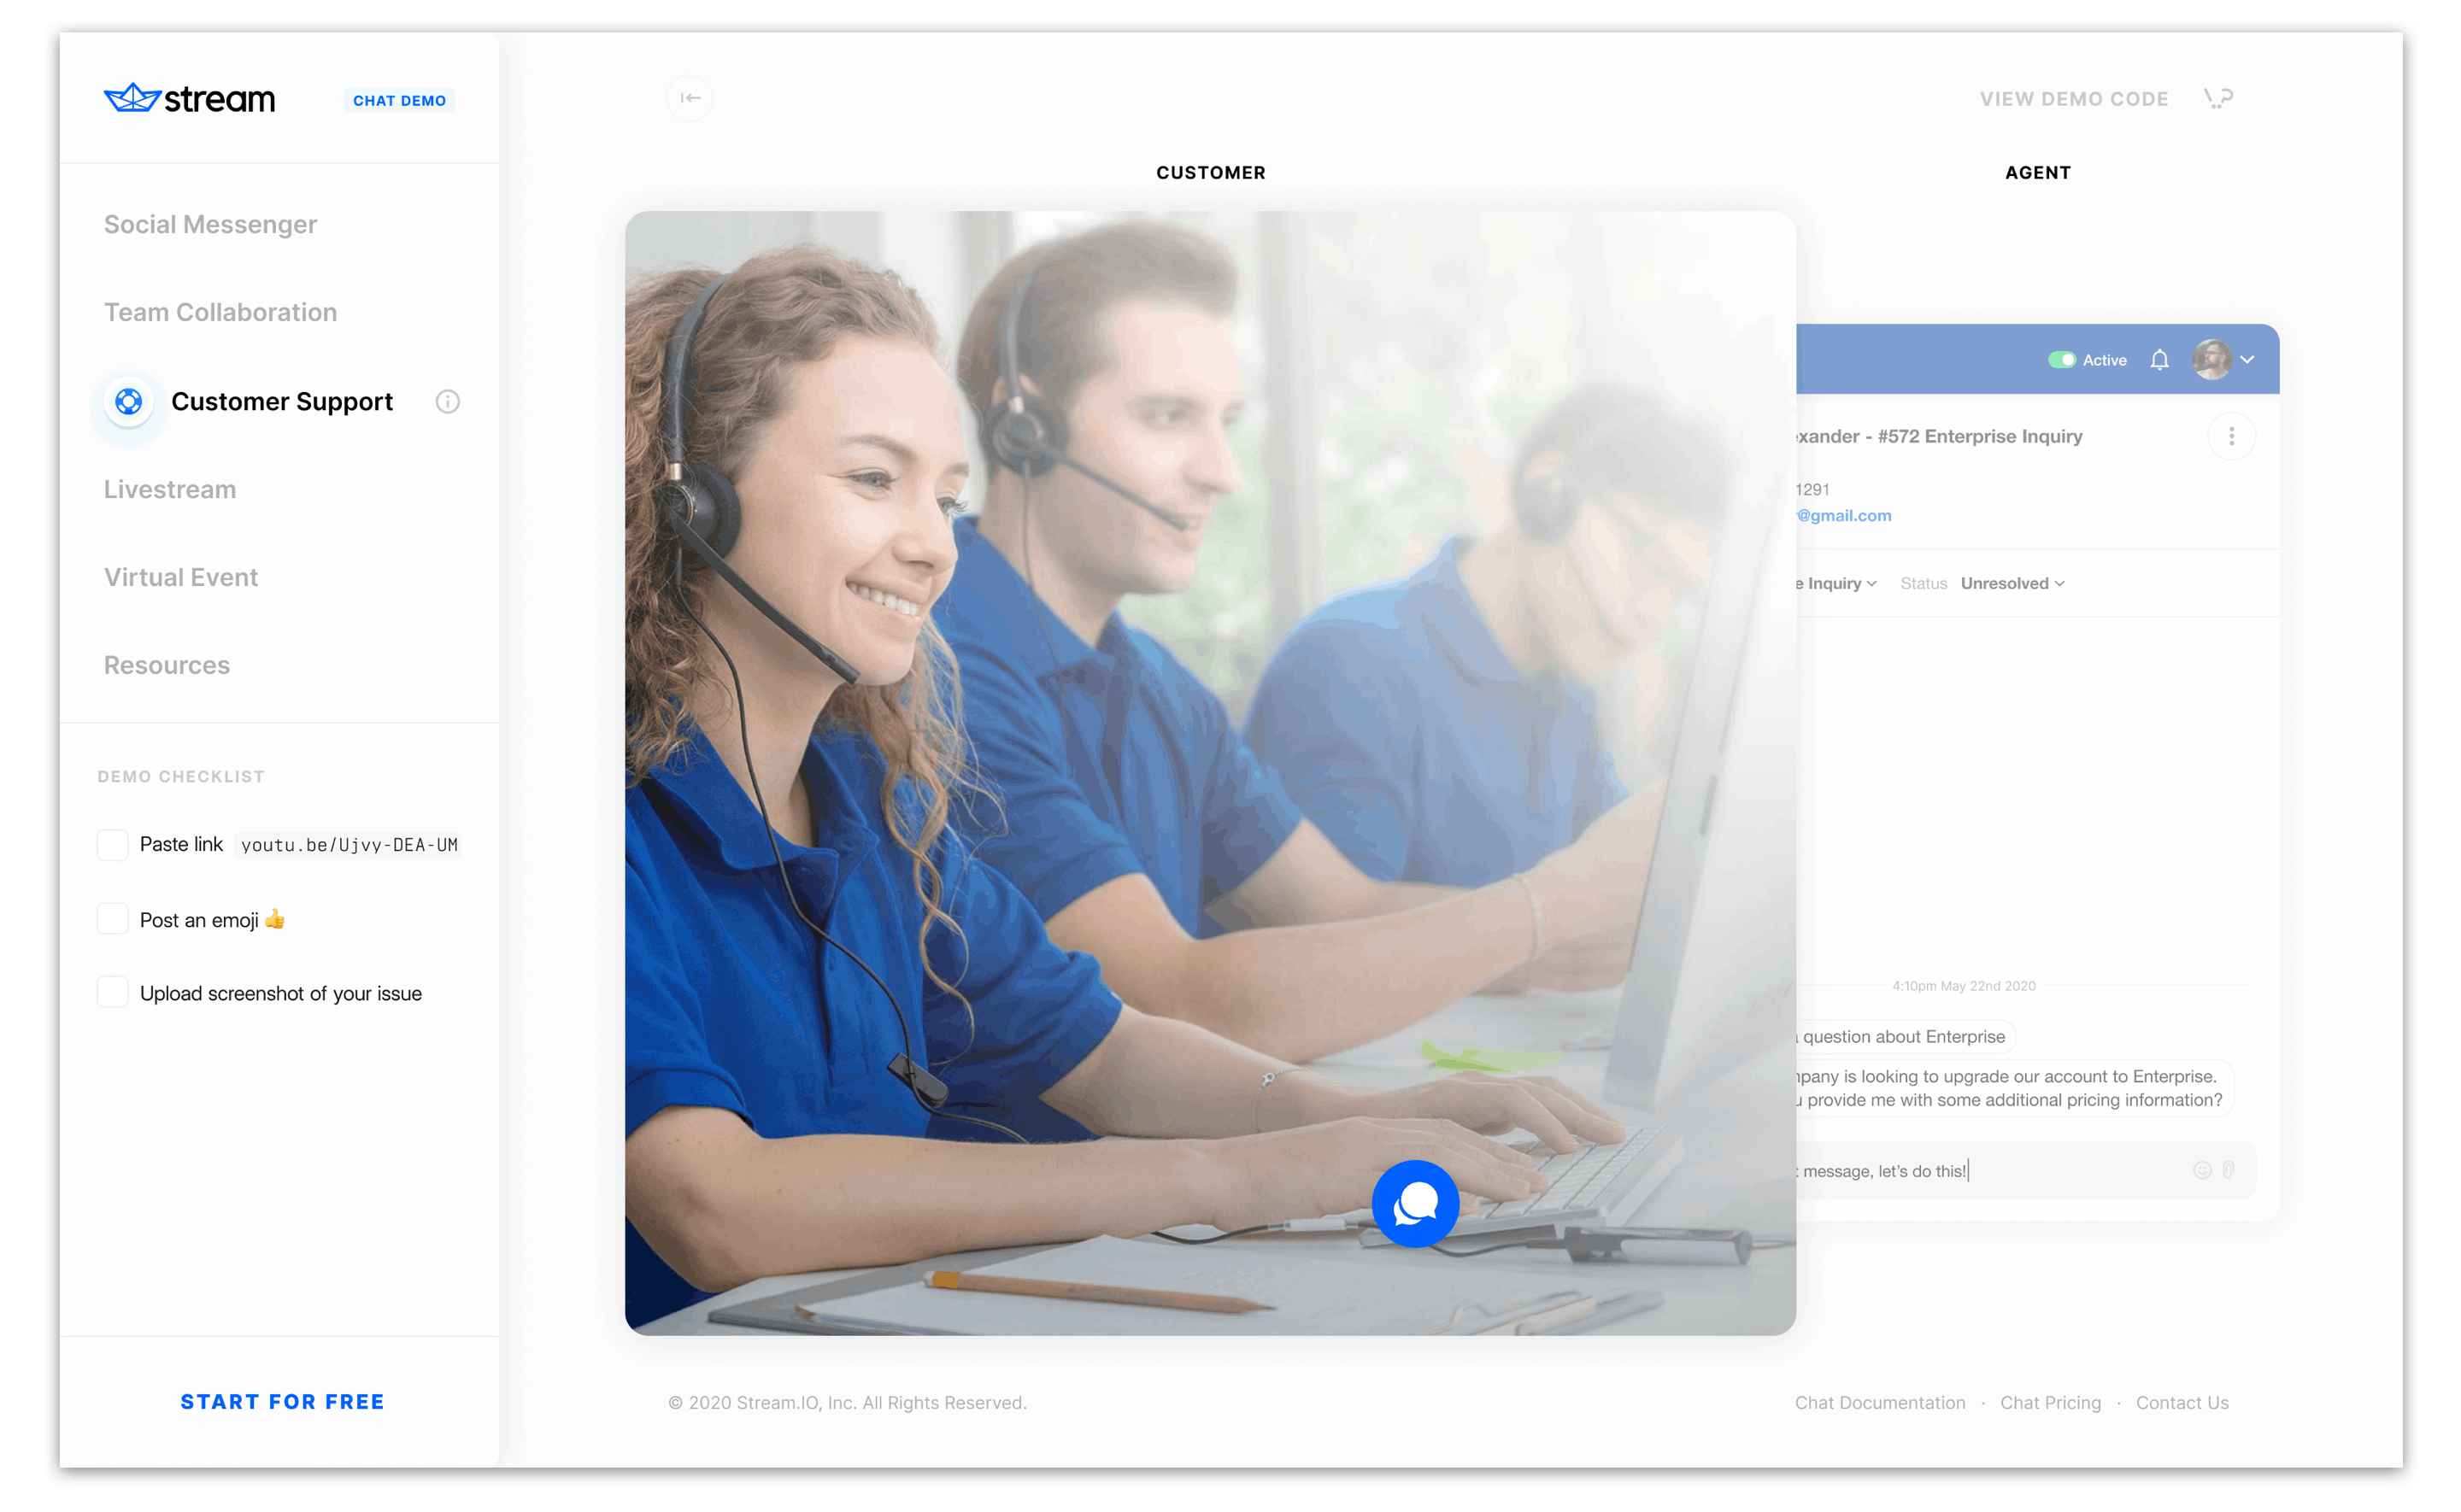 Customer support agents fielding live chat inquiries from users